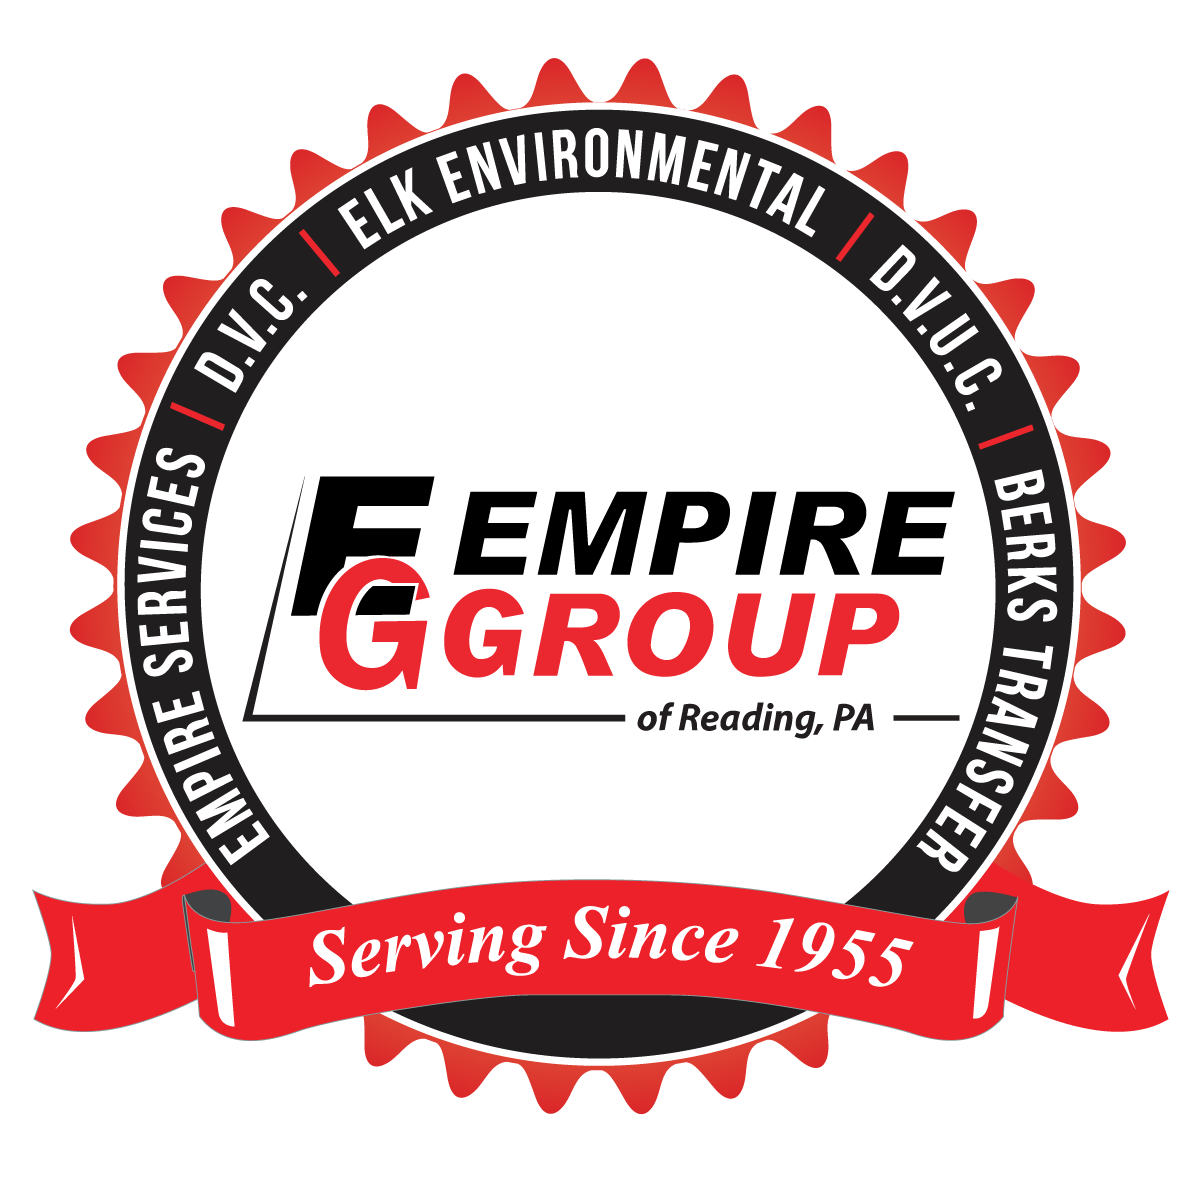 The logo for the empire group of reading pa